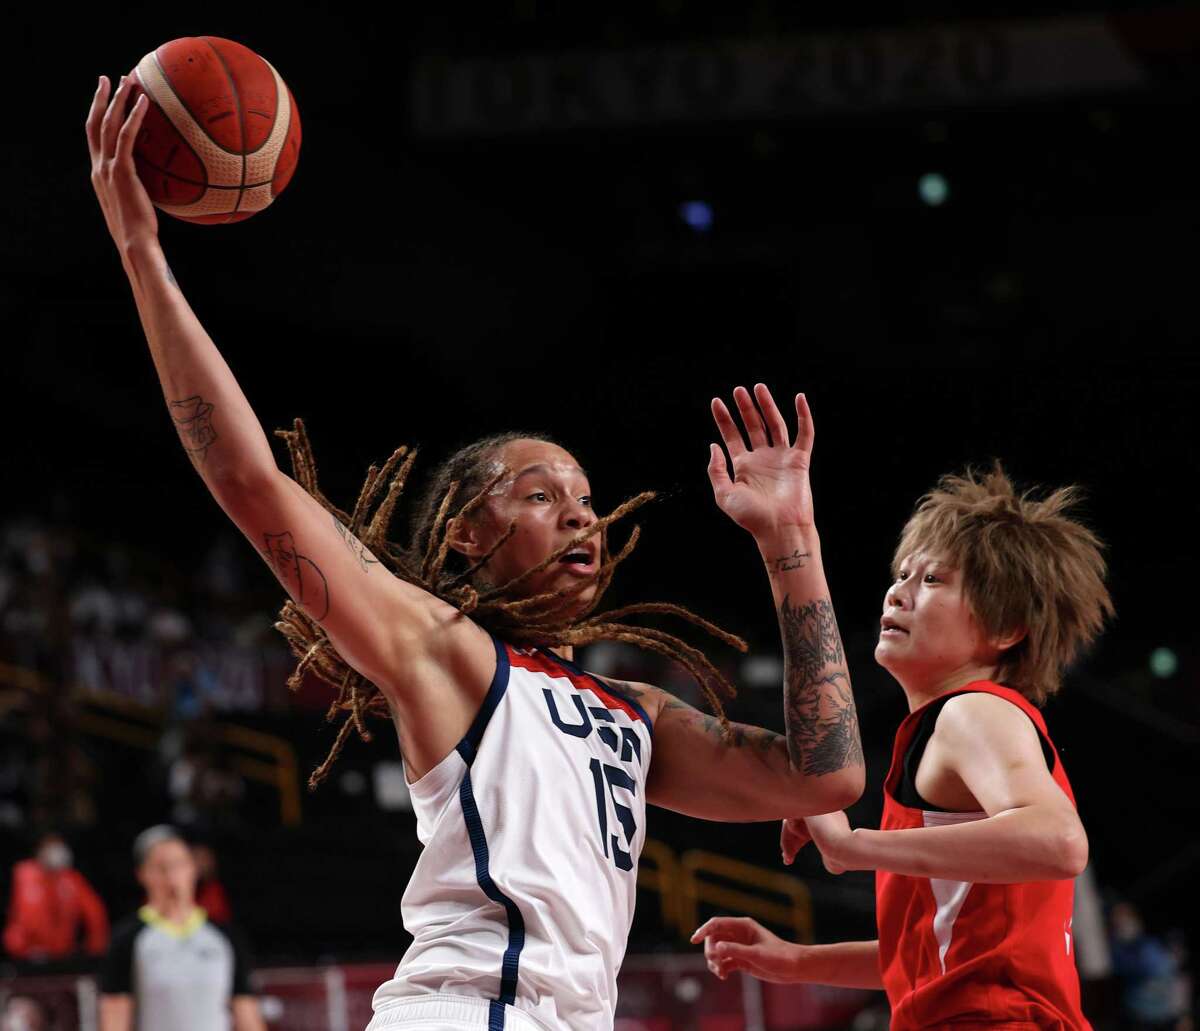 The United States' Brittney Griner (15) shoots over Japan's Maki Takada (8) during the Tokyo 2020 Olympics Women's Basketball Final at Saitama Super Arena on Aug. 8, 2021, in Saitama, Japan. (Robert Gauthier/Los Angeles Times/TNS)